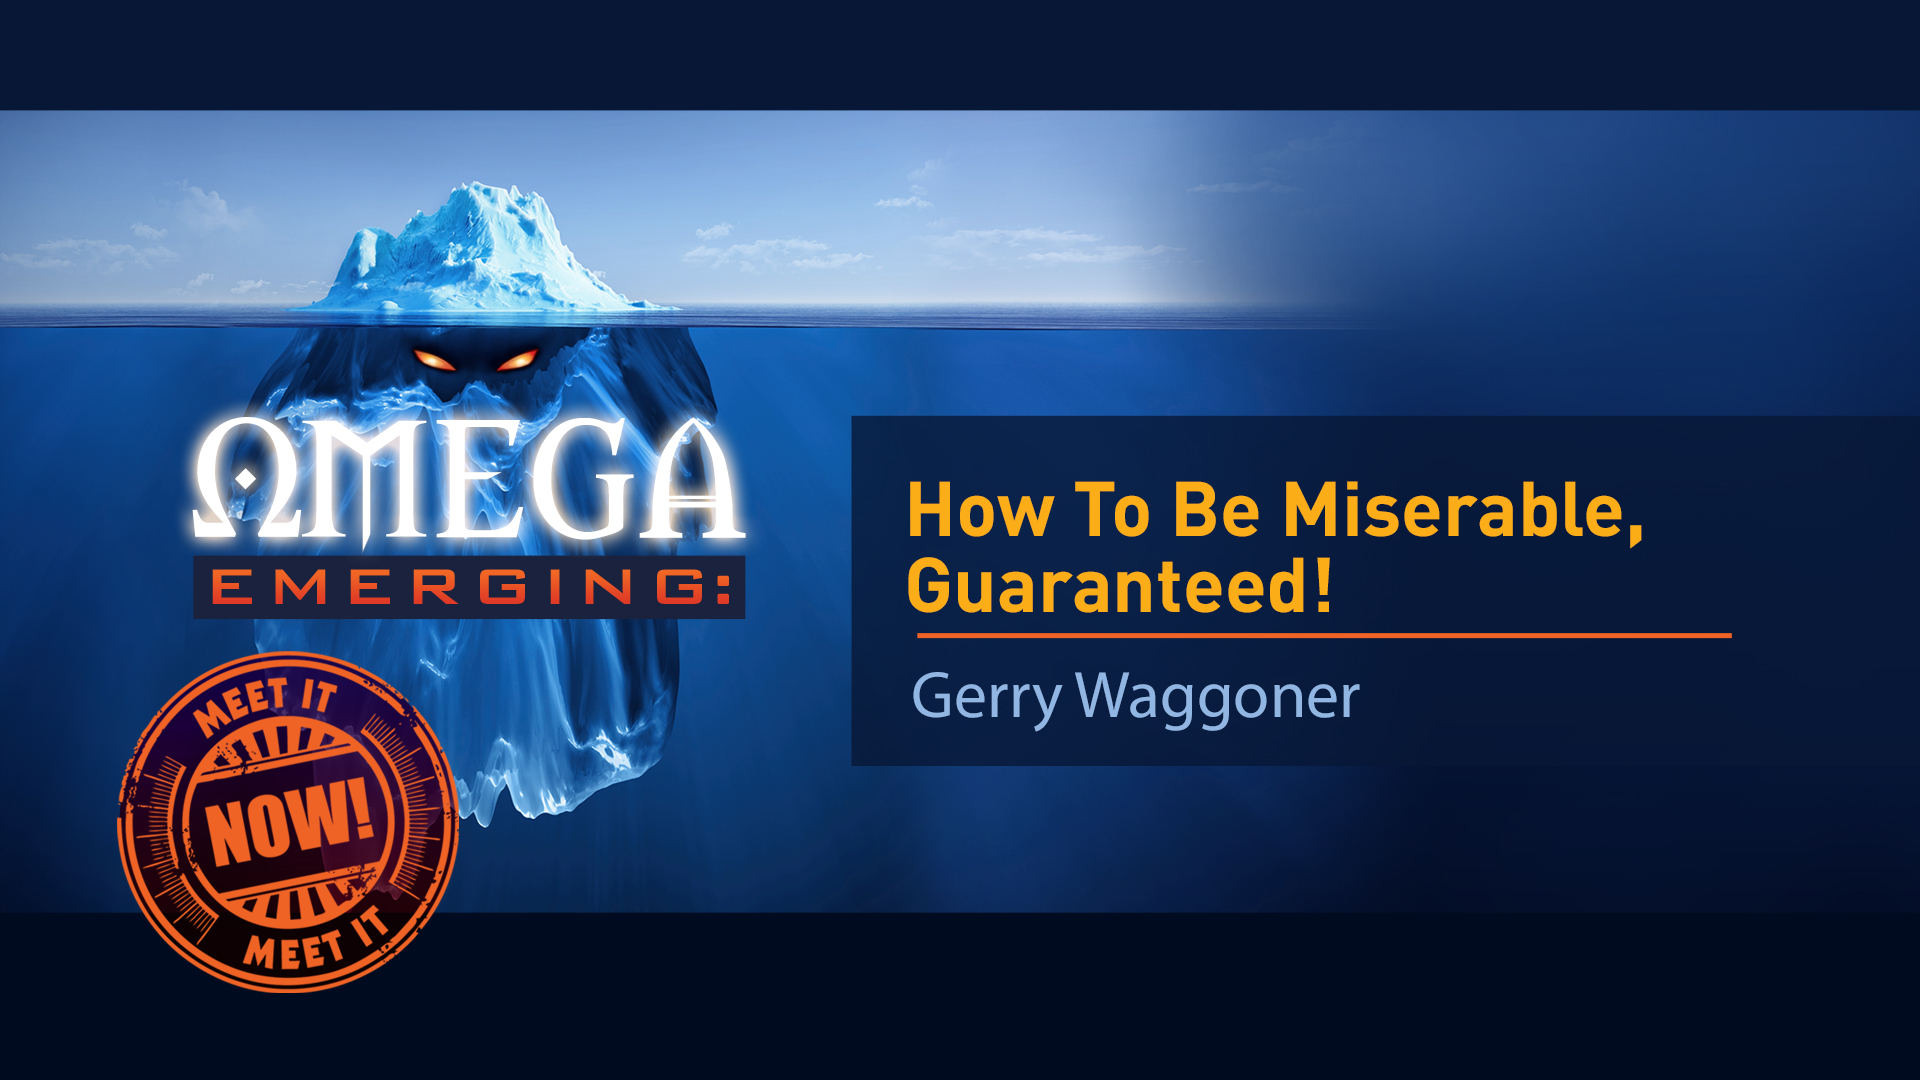 4. How To Be Miserable, Guaranteed - Gerry Waggoner